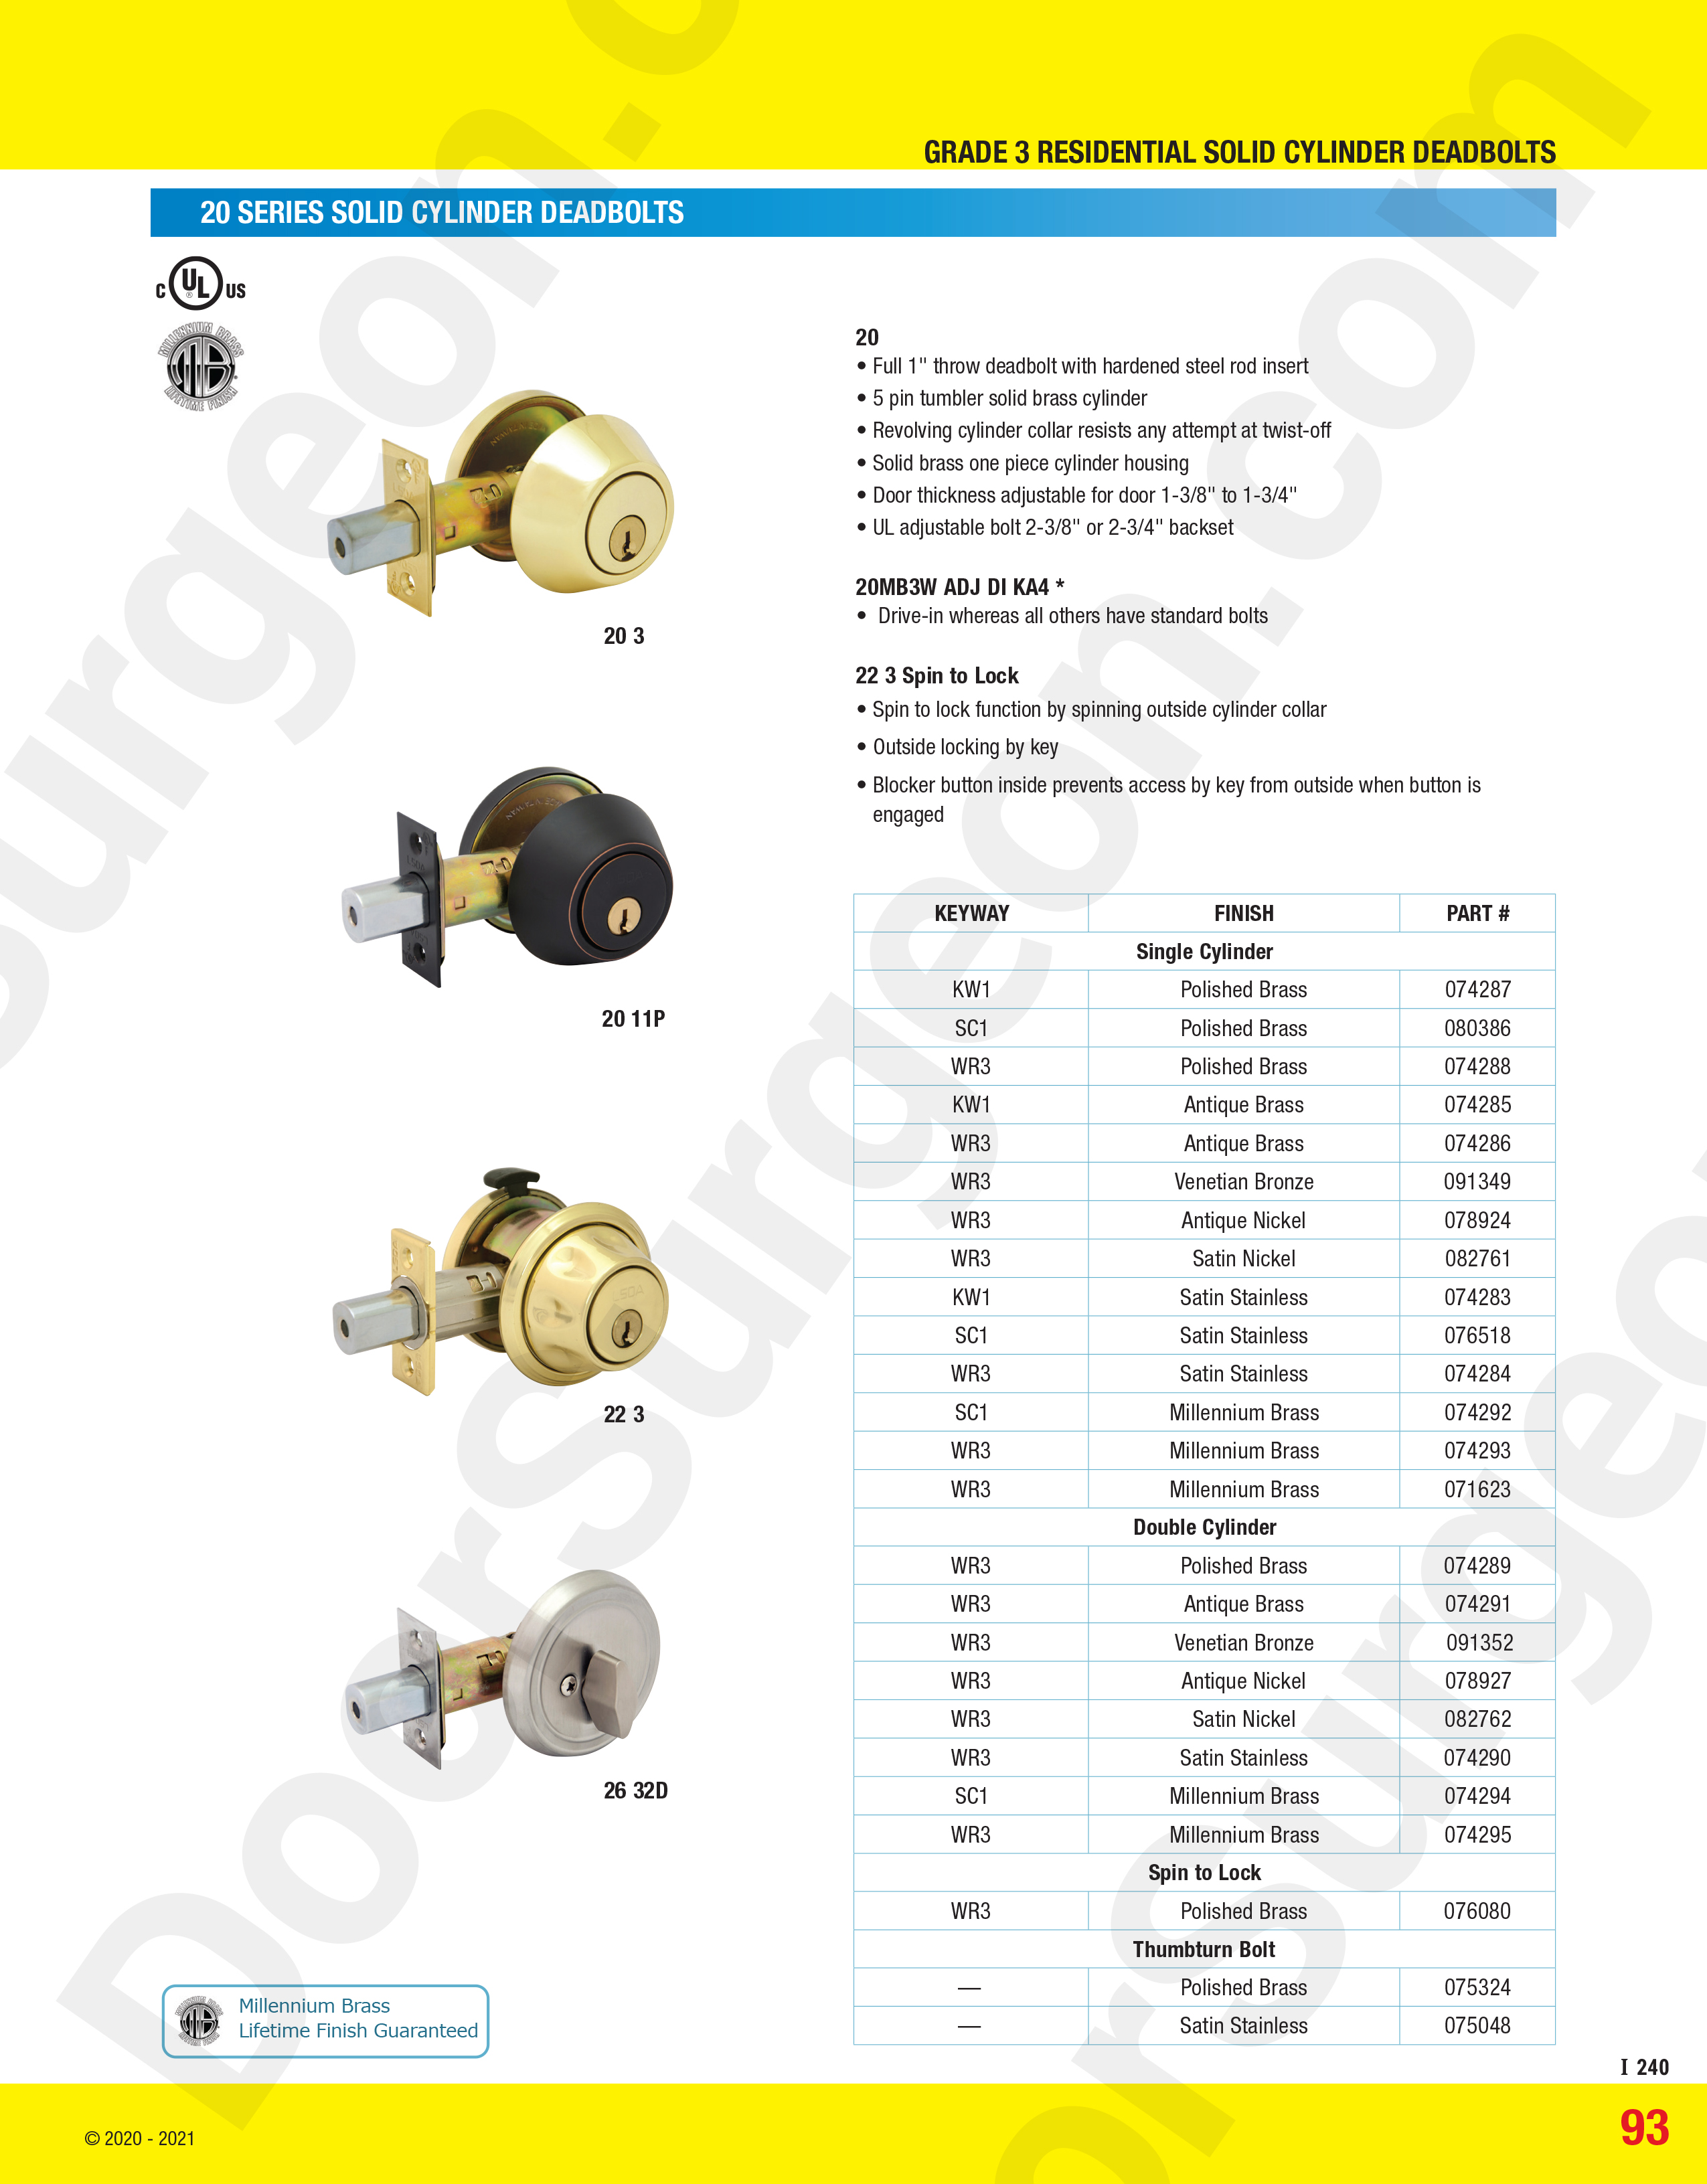 top of grade deadbolts single-sided cylinder or double-sided cylinders.